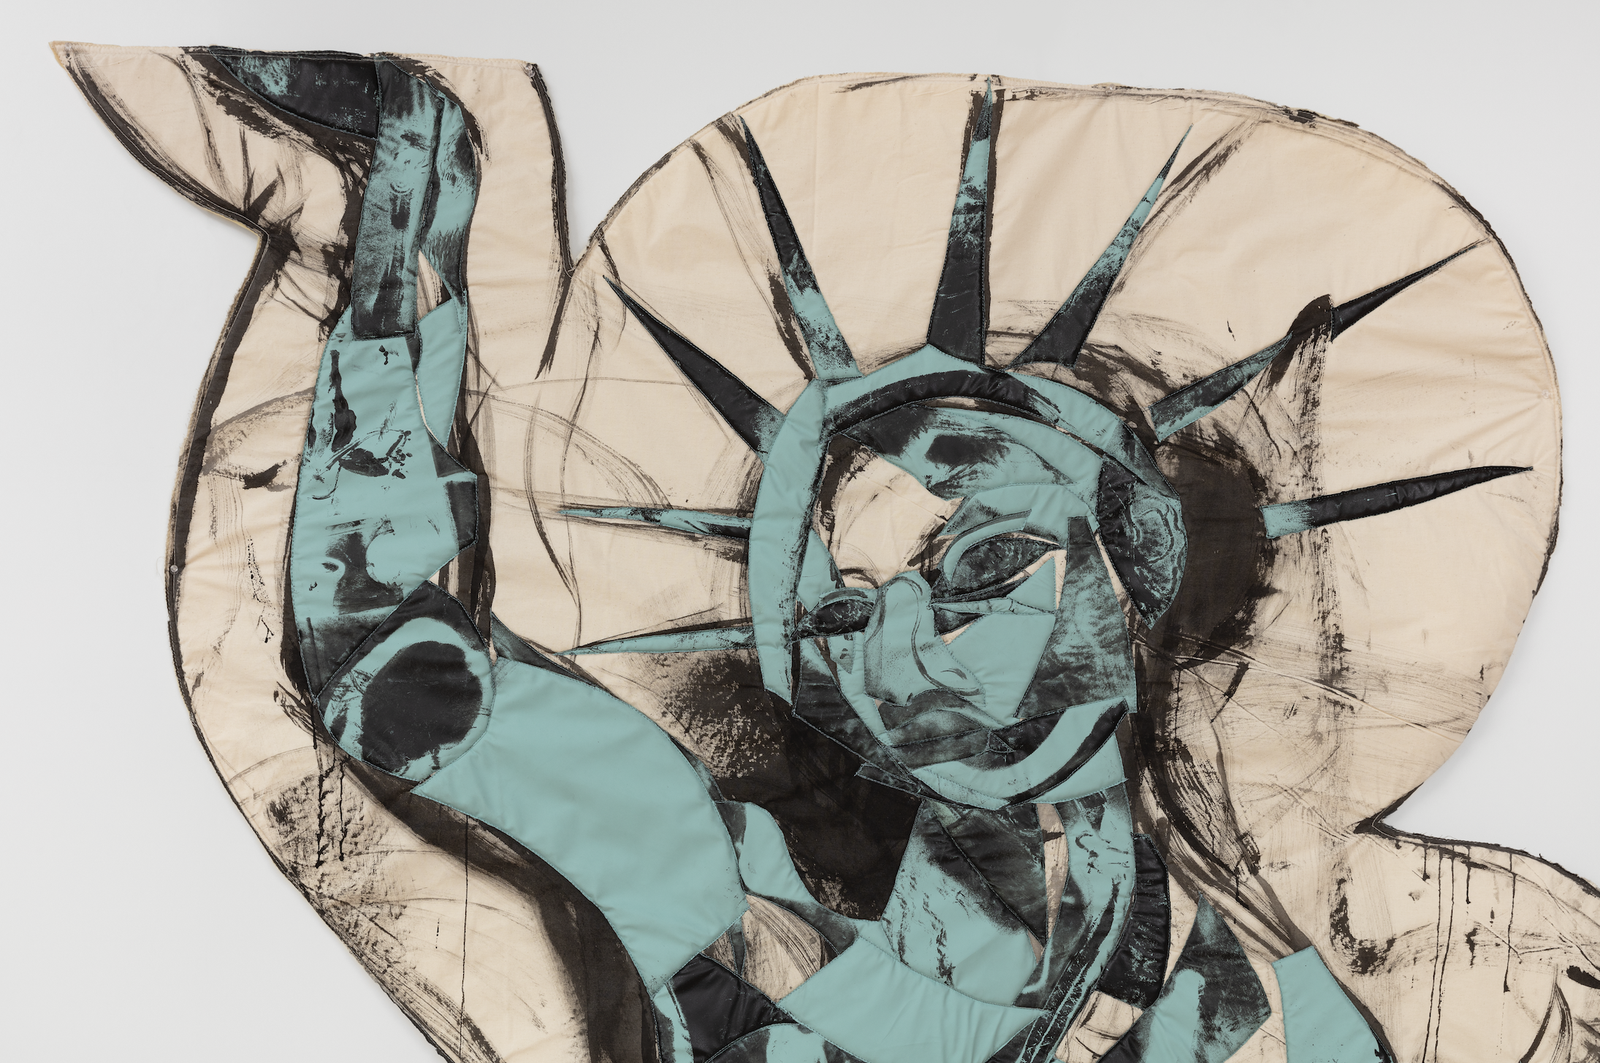 Angela Brandys, Statue of Liberty, 2021. Printed textile and foam, 237 x 182 cm.Courtesy of the artist and Anaïs Lellouche. Photo: Andrea Rossetti.